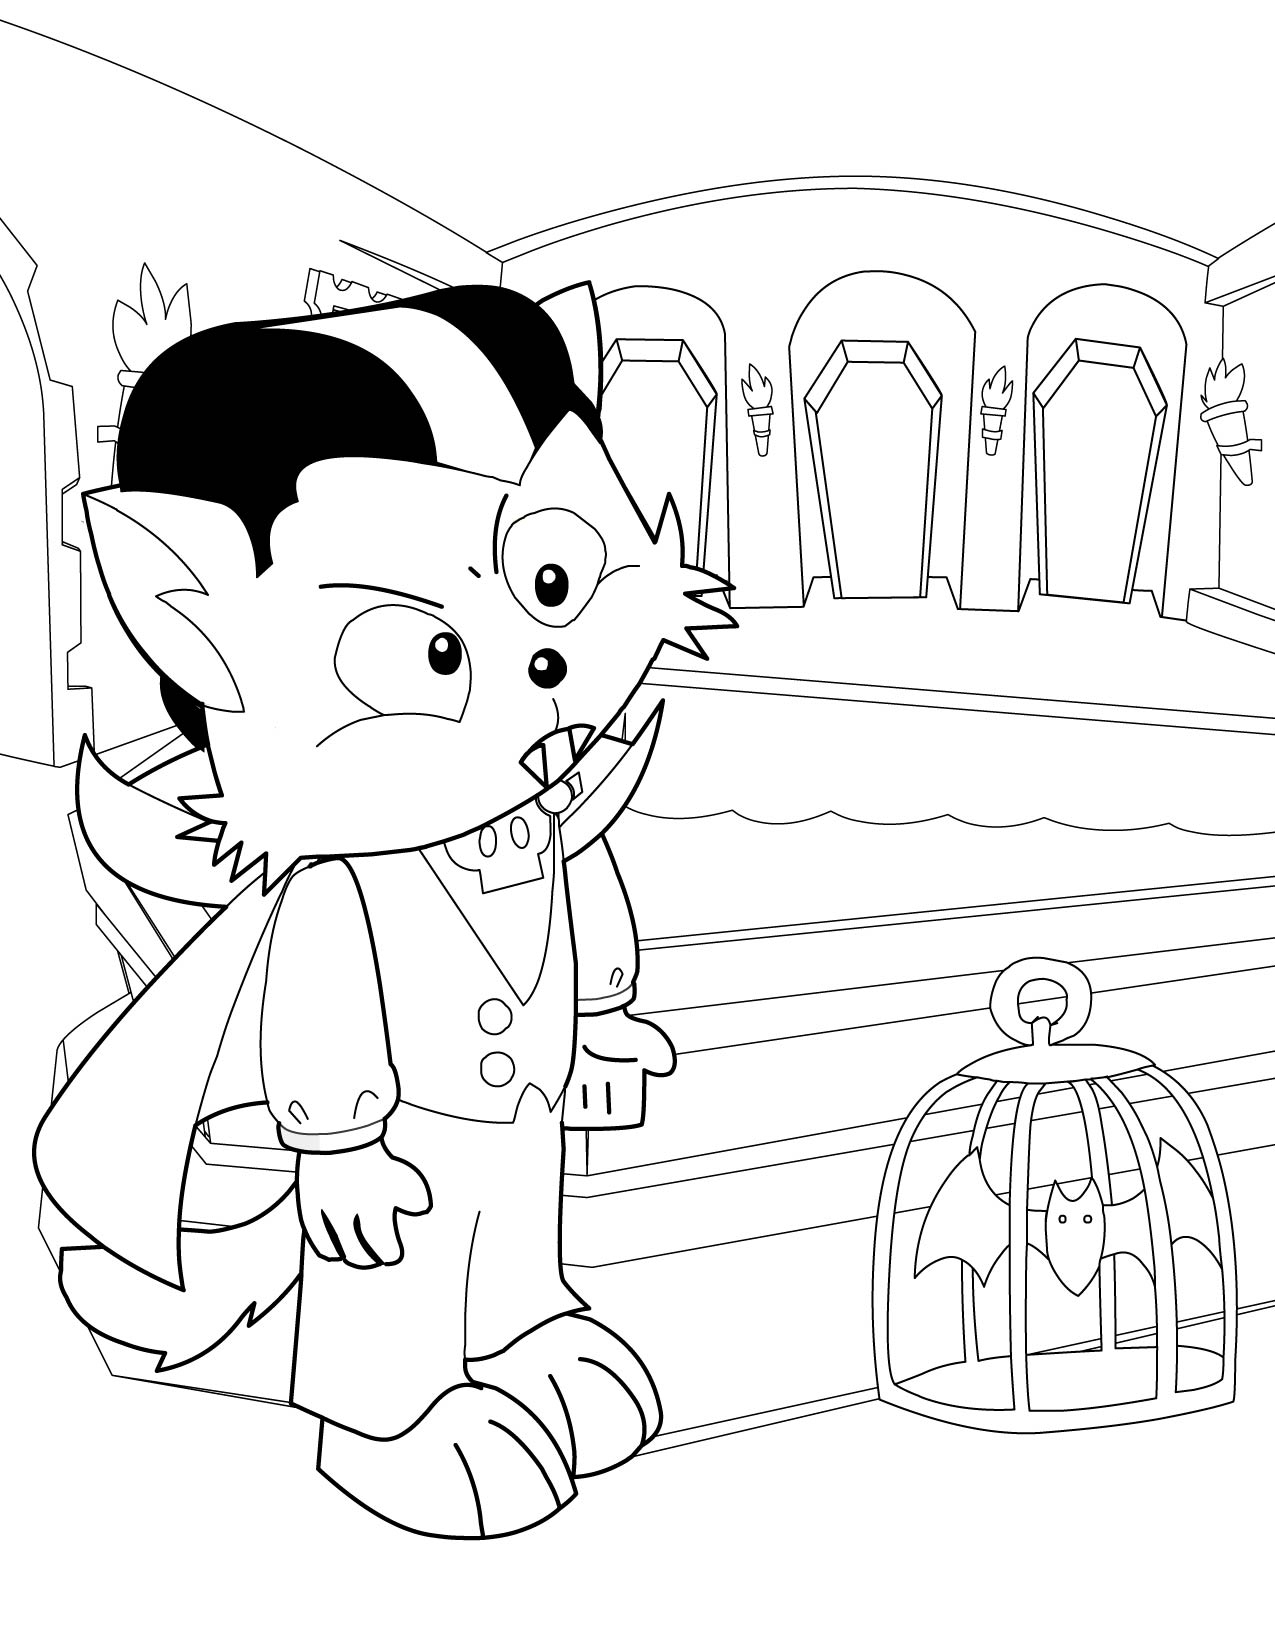 Vampire Coloring Pages To Print at GetColorings.com | Free printable